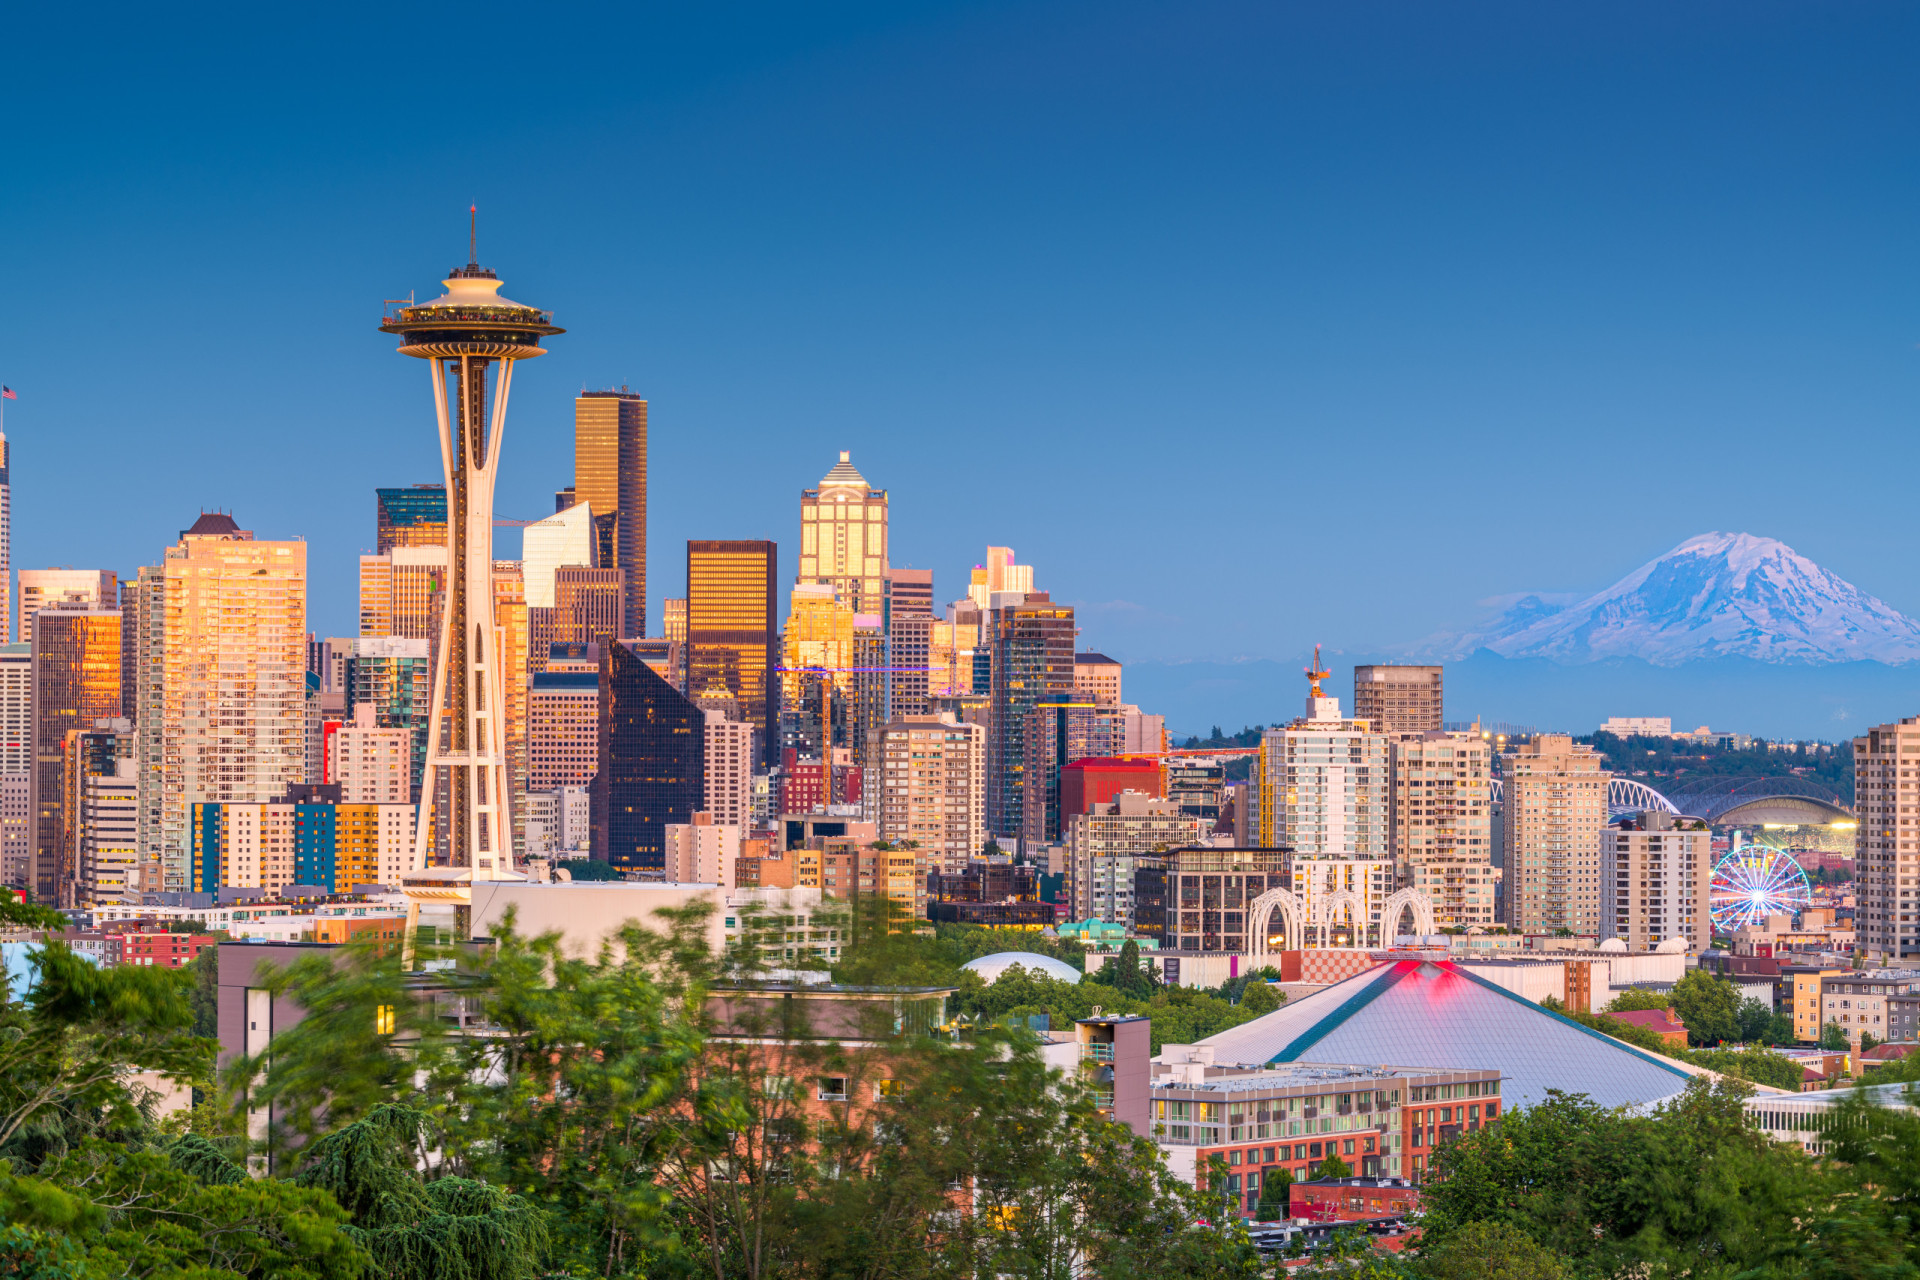 <p>Seattle's 69.6 rent index mirrors its status as a booming tech hub. Home to major firms and lush green landscapes, it offers a unique mix of urban and natural beauty, albeit at a premium.</p><p>You may also like:<a href="https://www.starsinsider.com/n/281247?utm_source=msn.com&utm_medium=display&utm_campaign=referral_description&utm_content=651794en-in"> Look up at the world's most stunning ceilings</a></p>